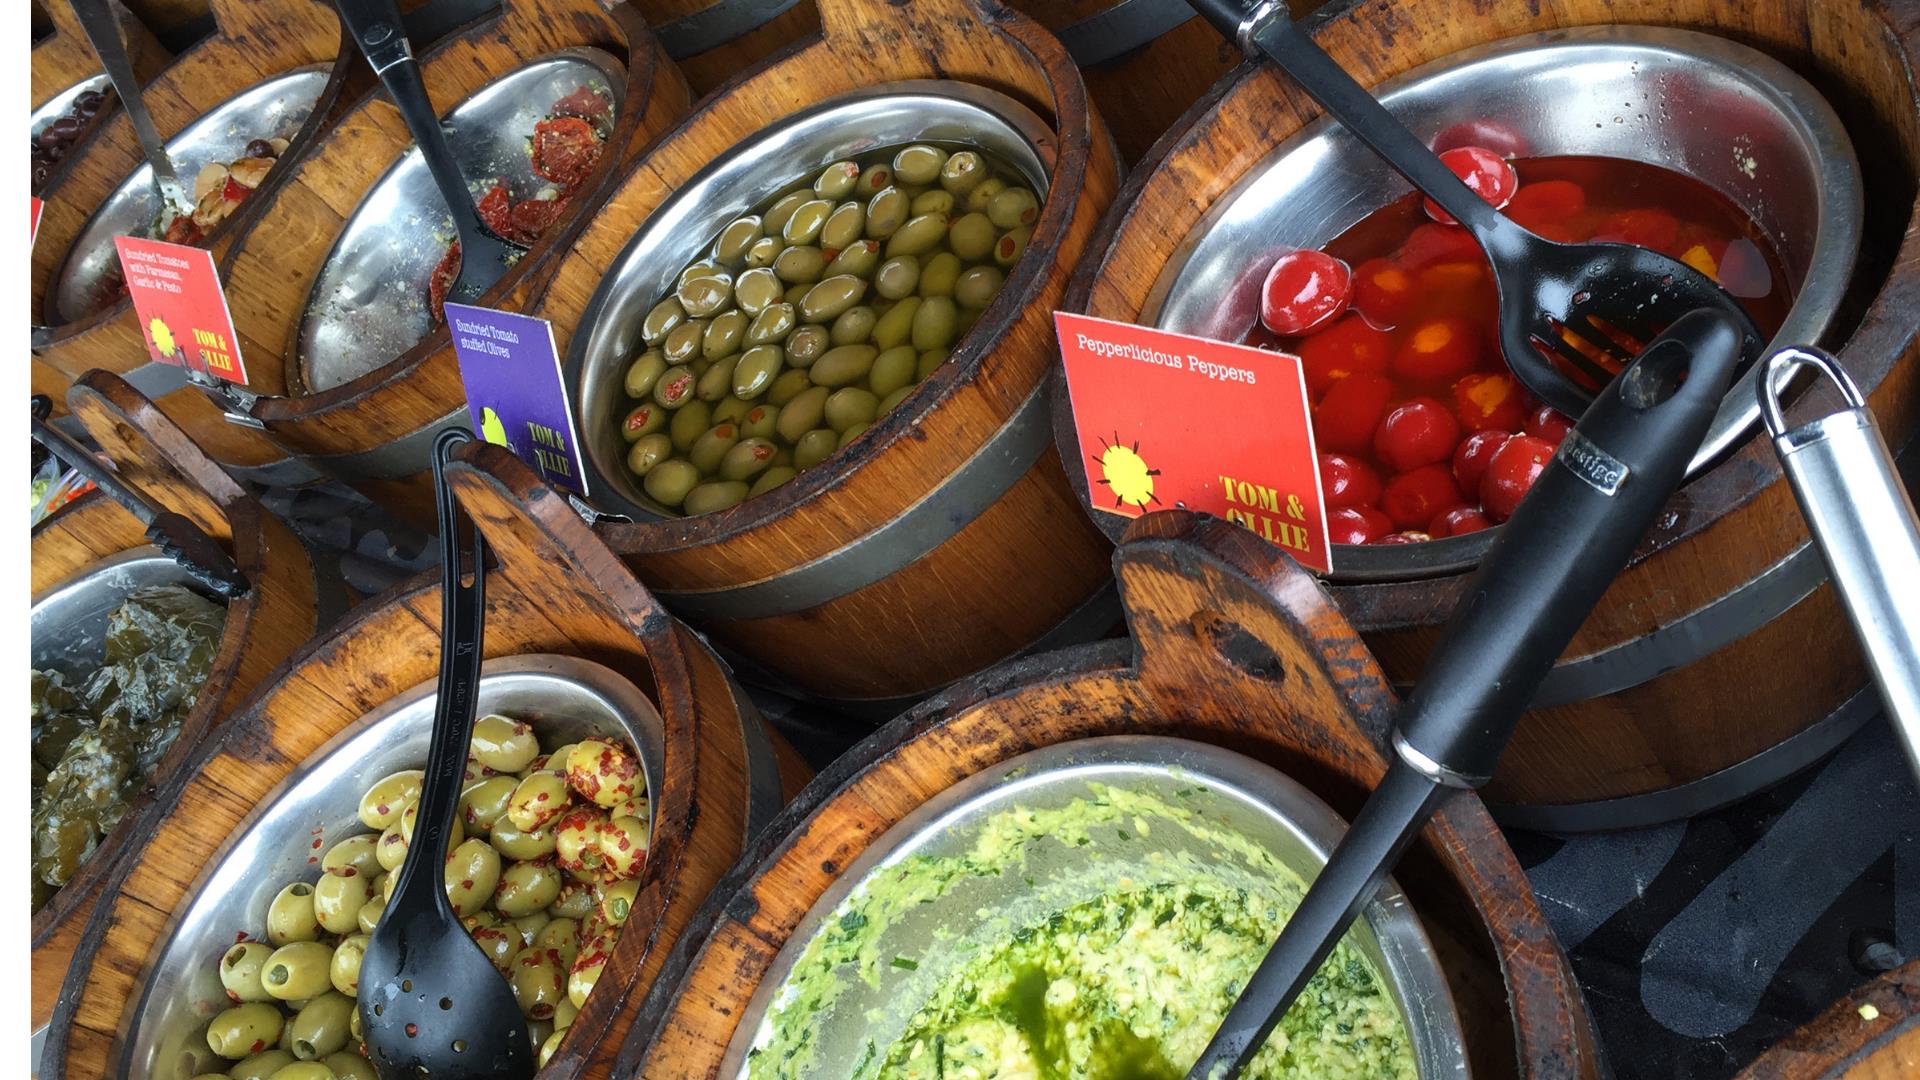 Image shows wooden tubs of various food stuffs such as olives and cherries